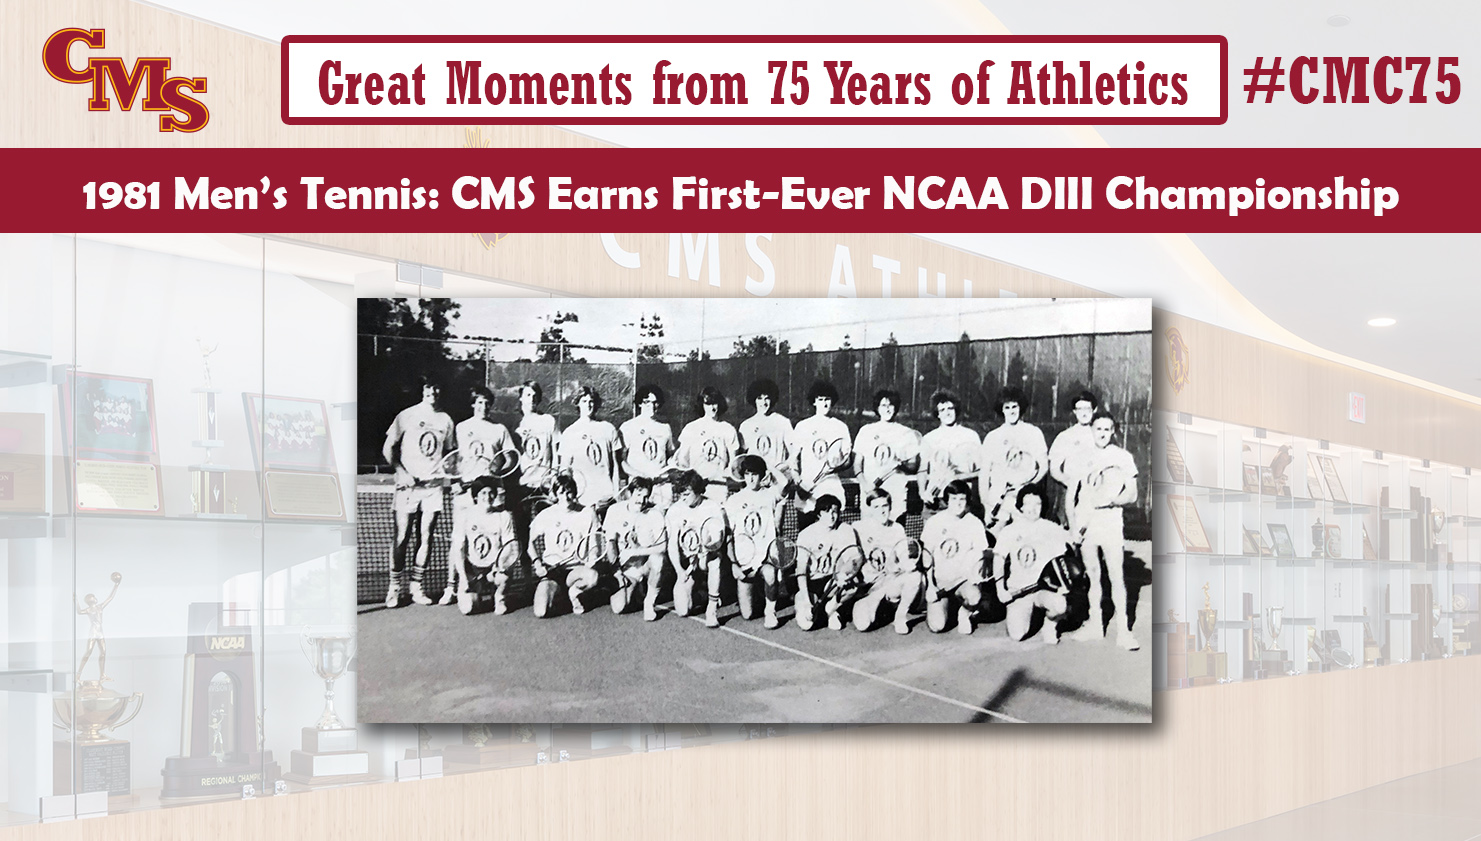 A team shot of the 1981 CMS men's tennis team. The words over the photo read: Great Moments from 75 Years of Athletics - 1981 Men's Tennis: CMS Earns First-Ever NCAA DIII Championship with the hashtag #CMC75